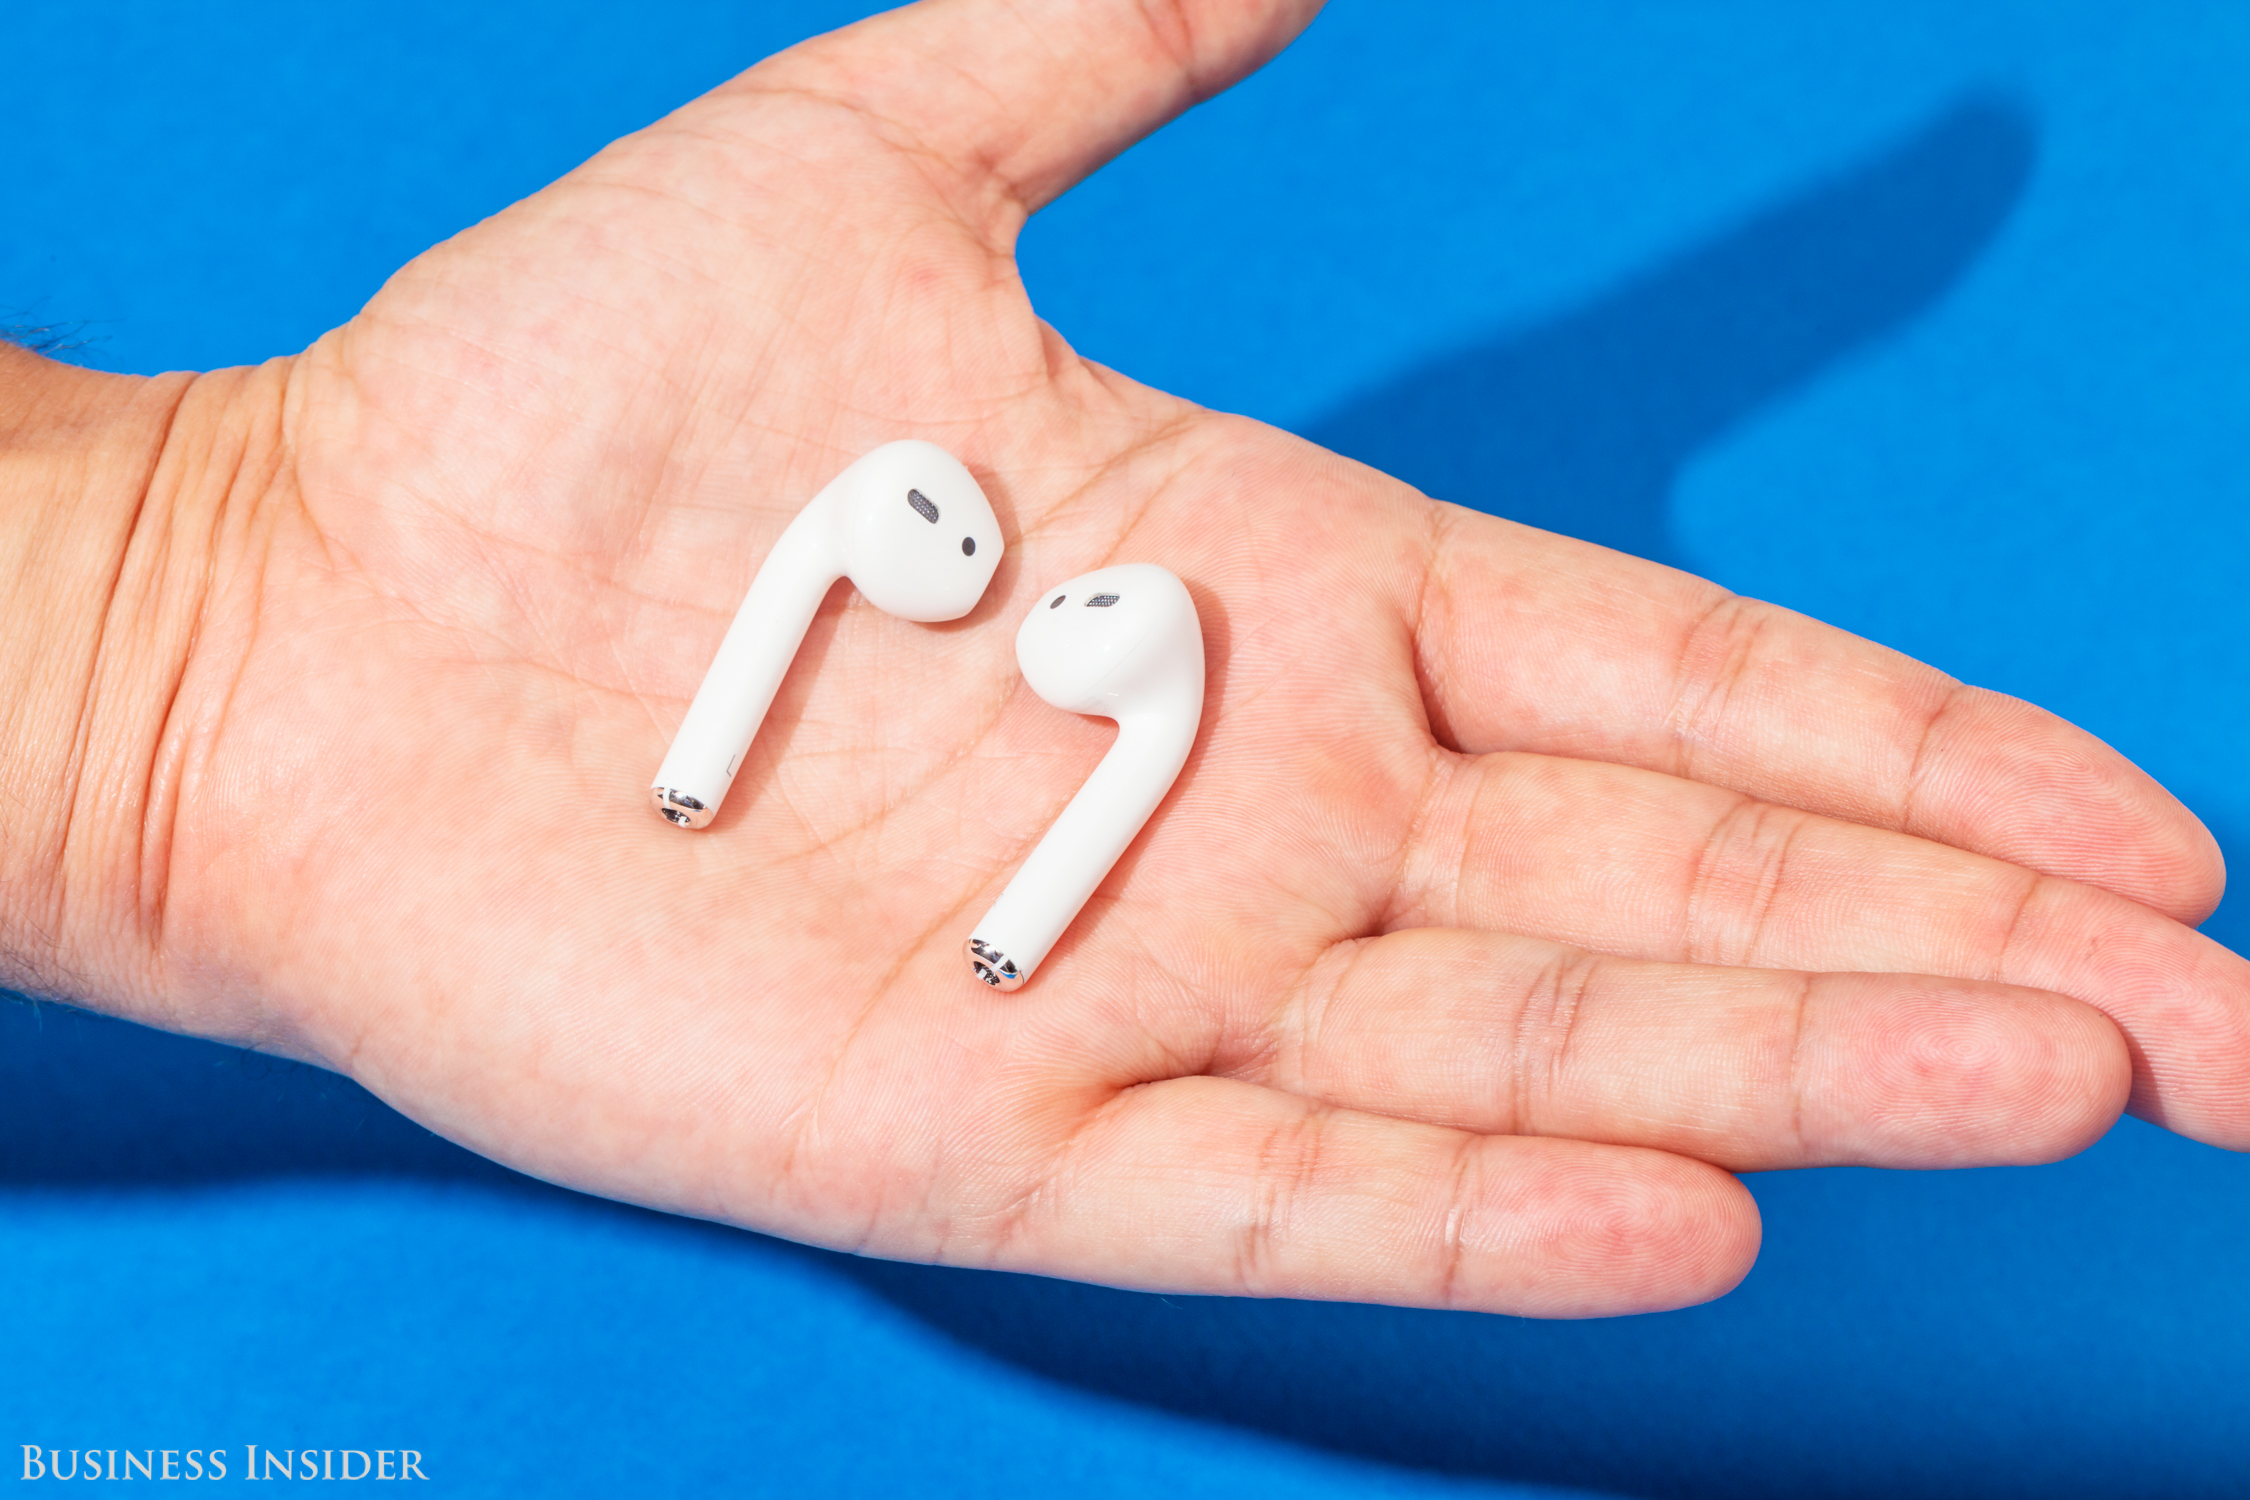 How To Connect Airpods To Your Windows Pc In A Few Quick Steps